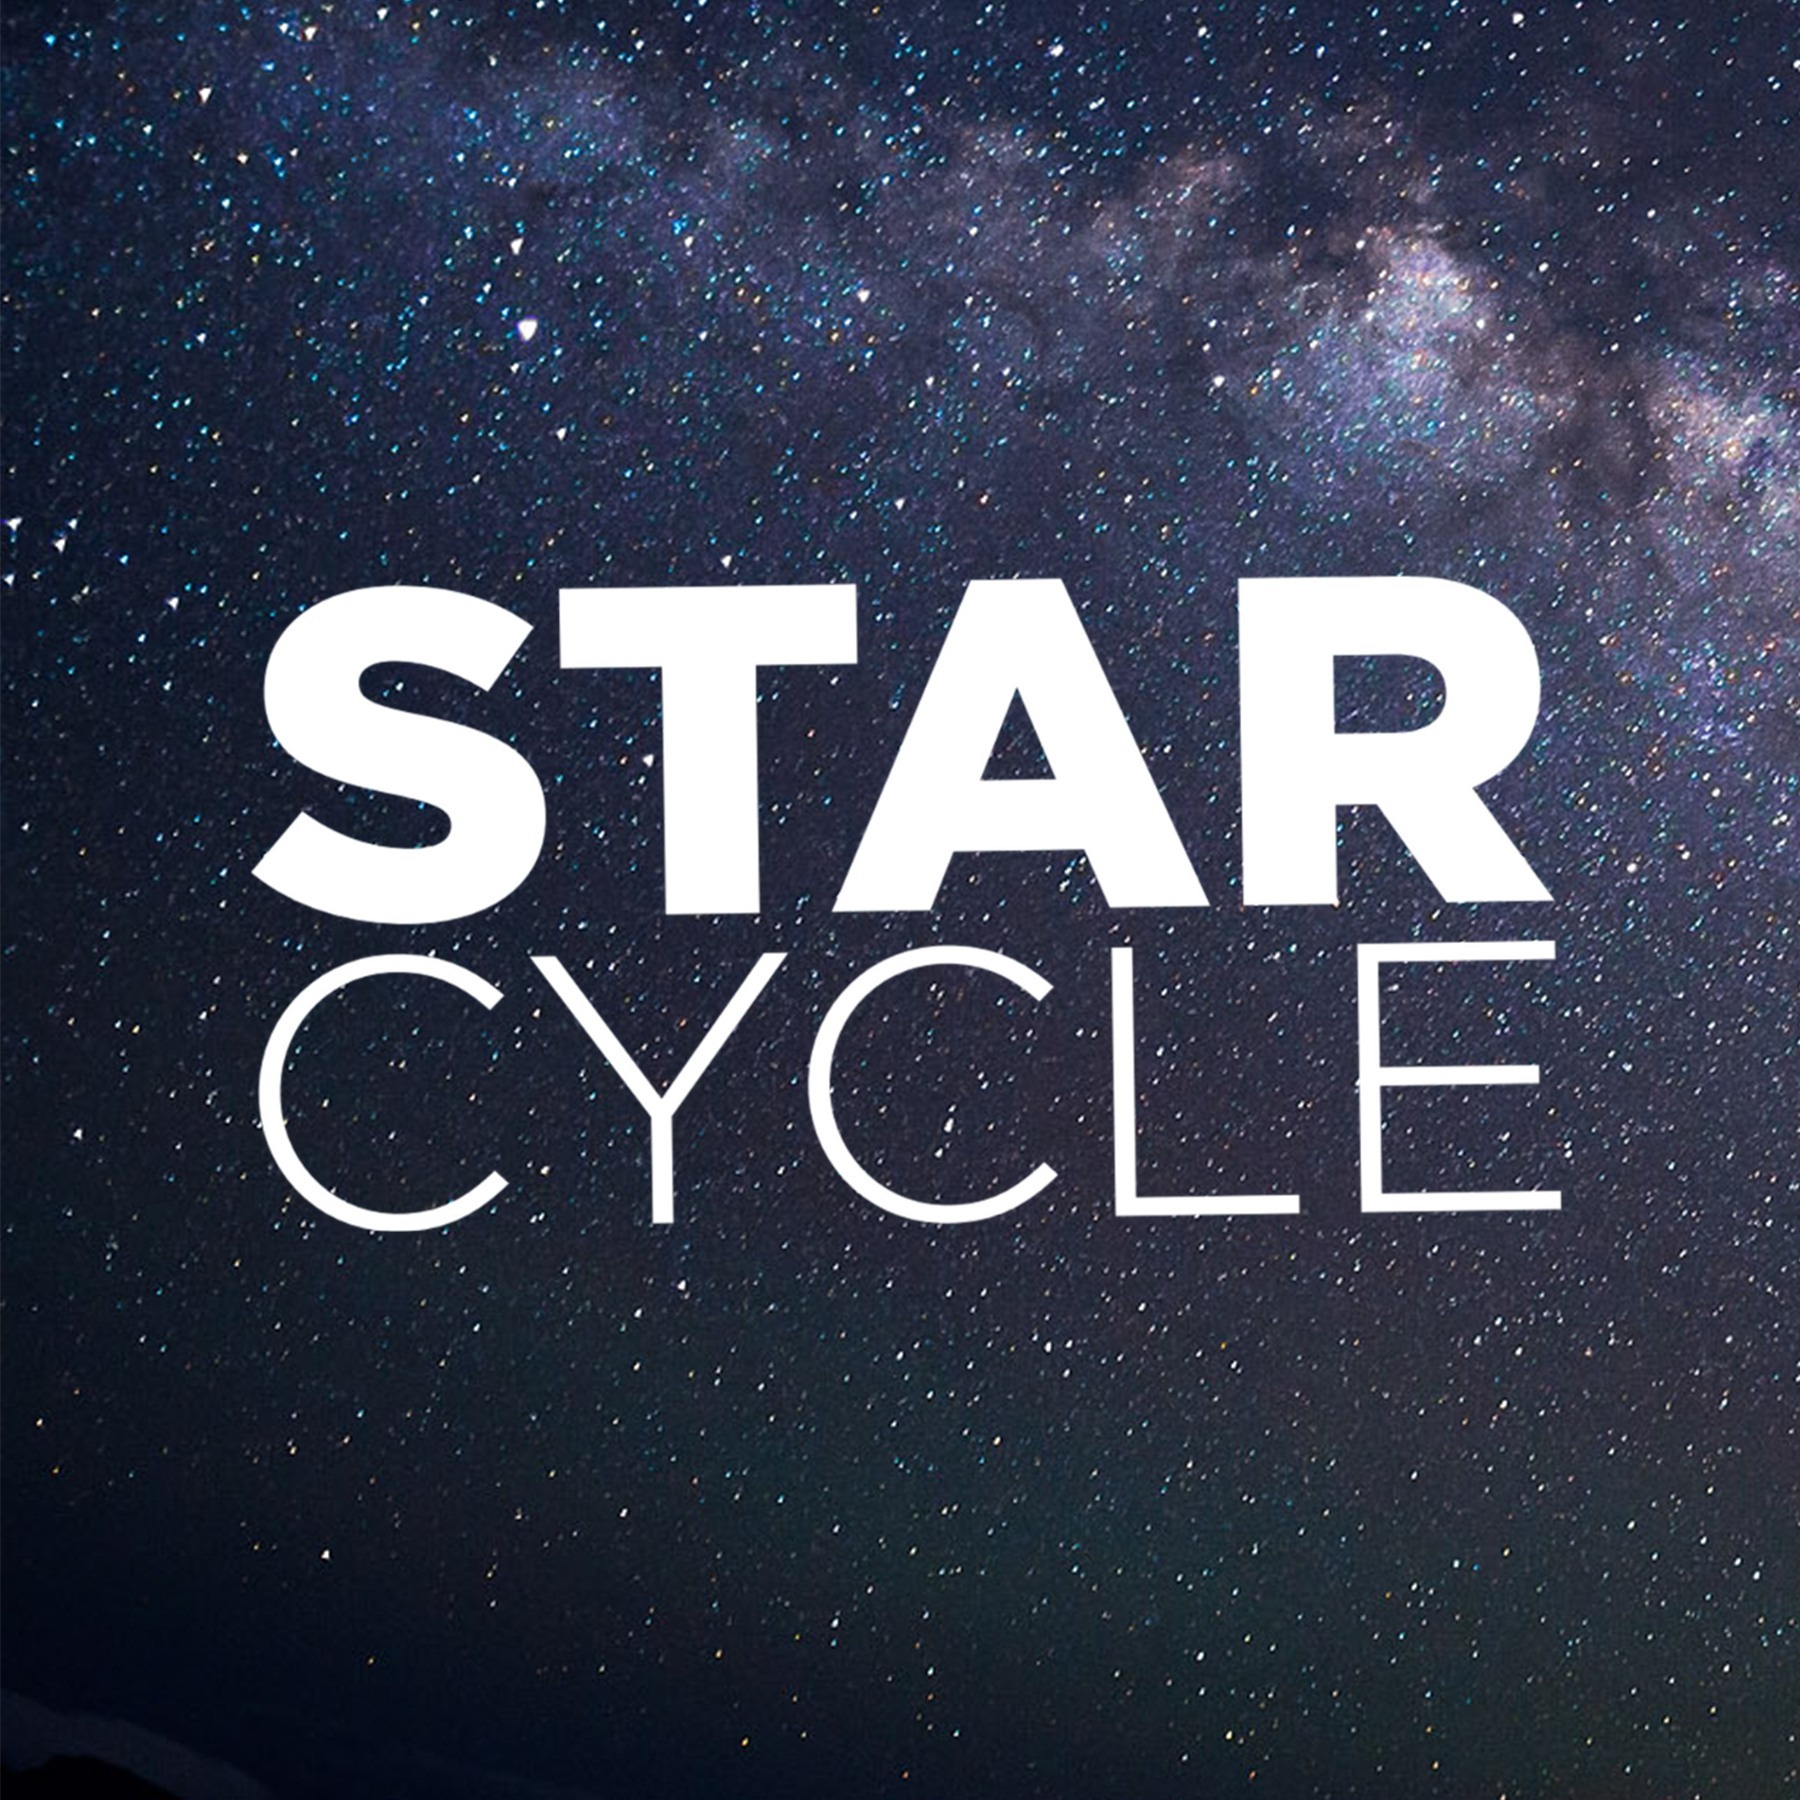 StarCycle logo